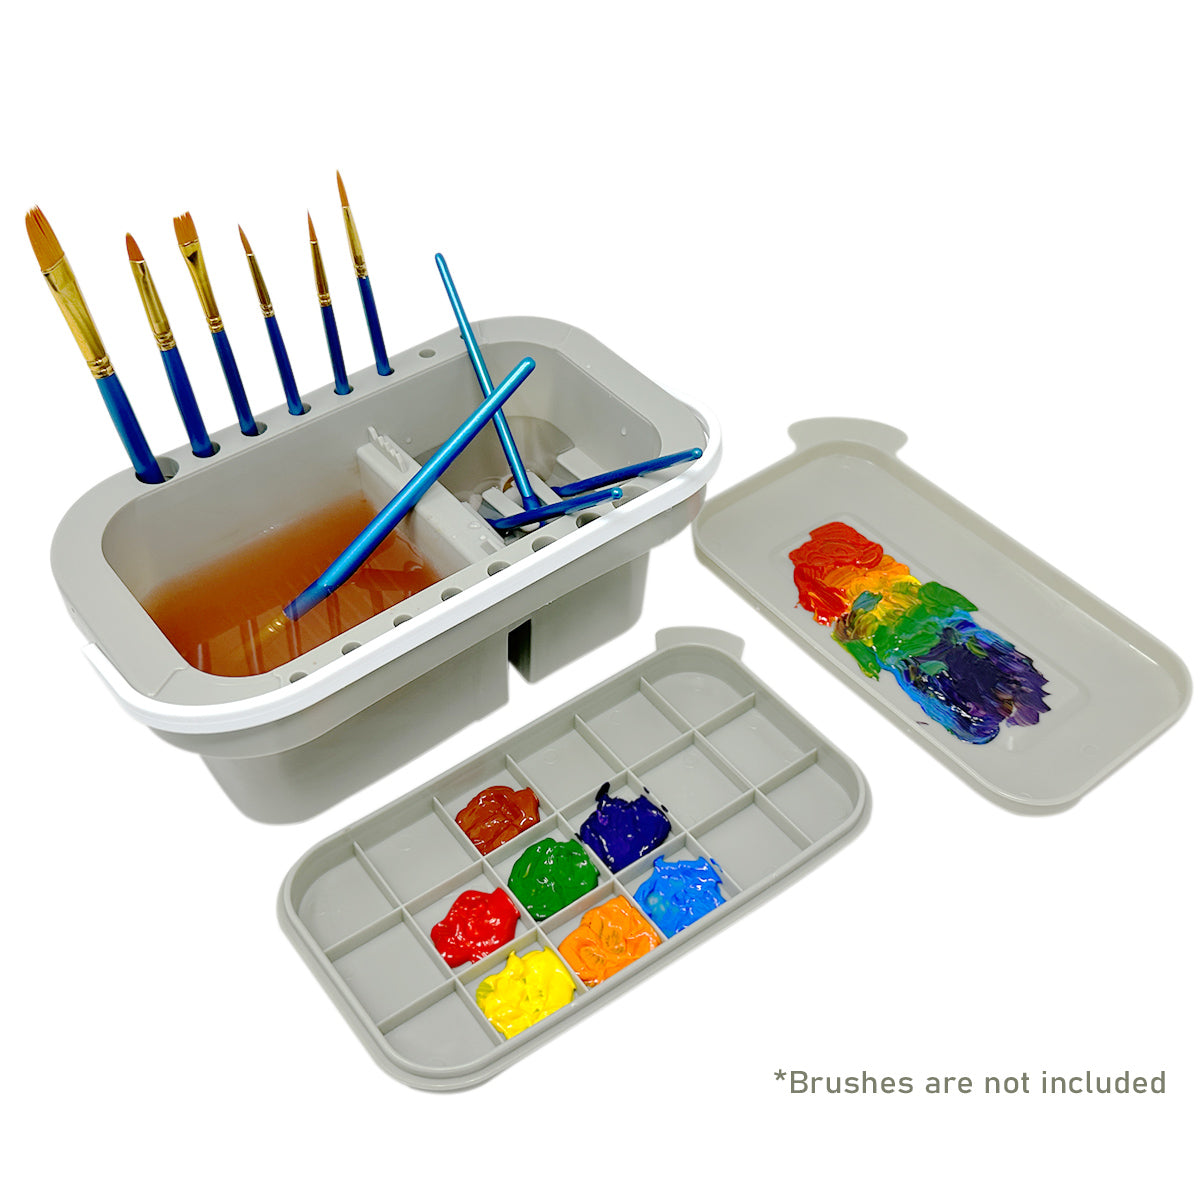 Wrapables Paint Brush Cleaner, Artist Paint Brush Holder with Palette Tray and Handle for Acrylic, Watercolor and Water-Based Paints